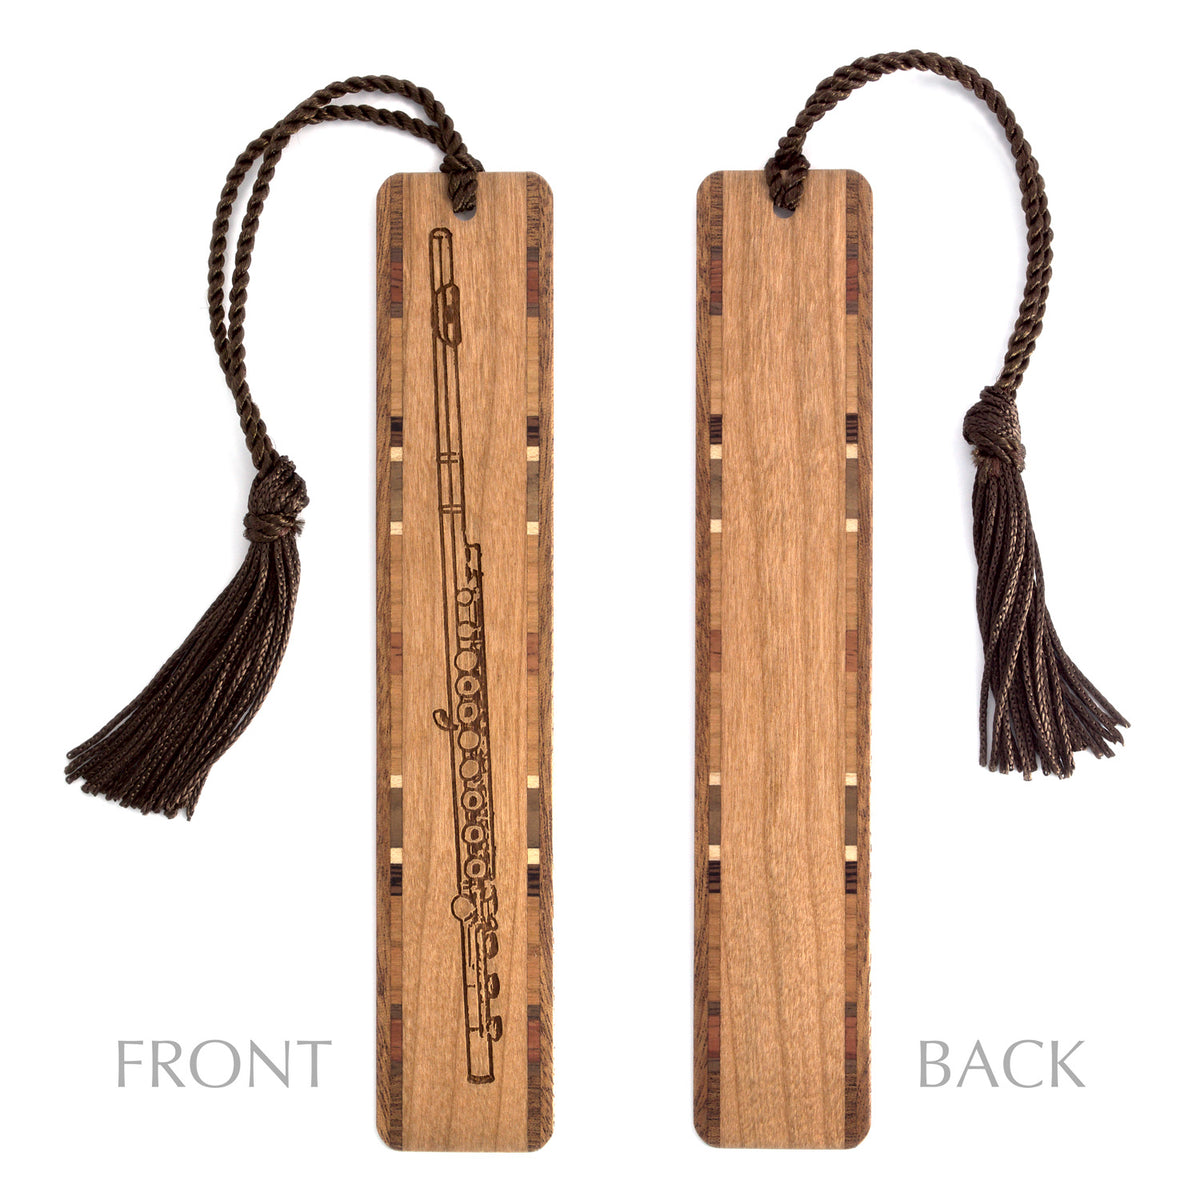 Laser Engraved Balsa Wood Bookmarks With Colored Tassel 